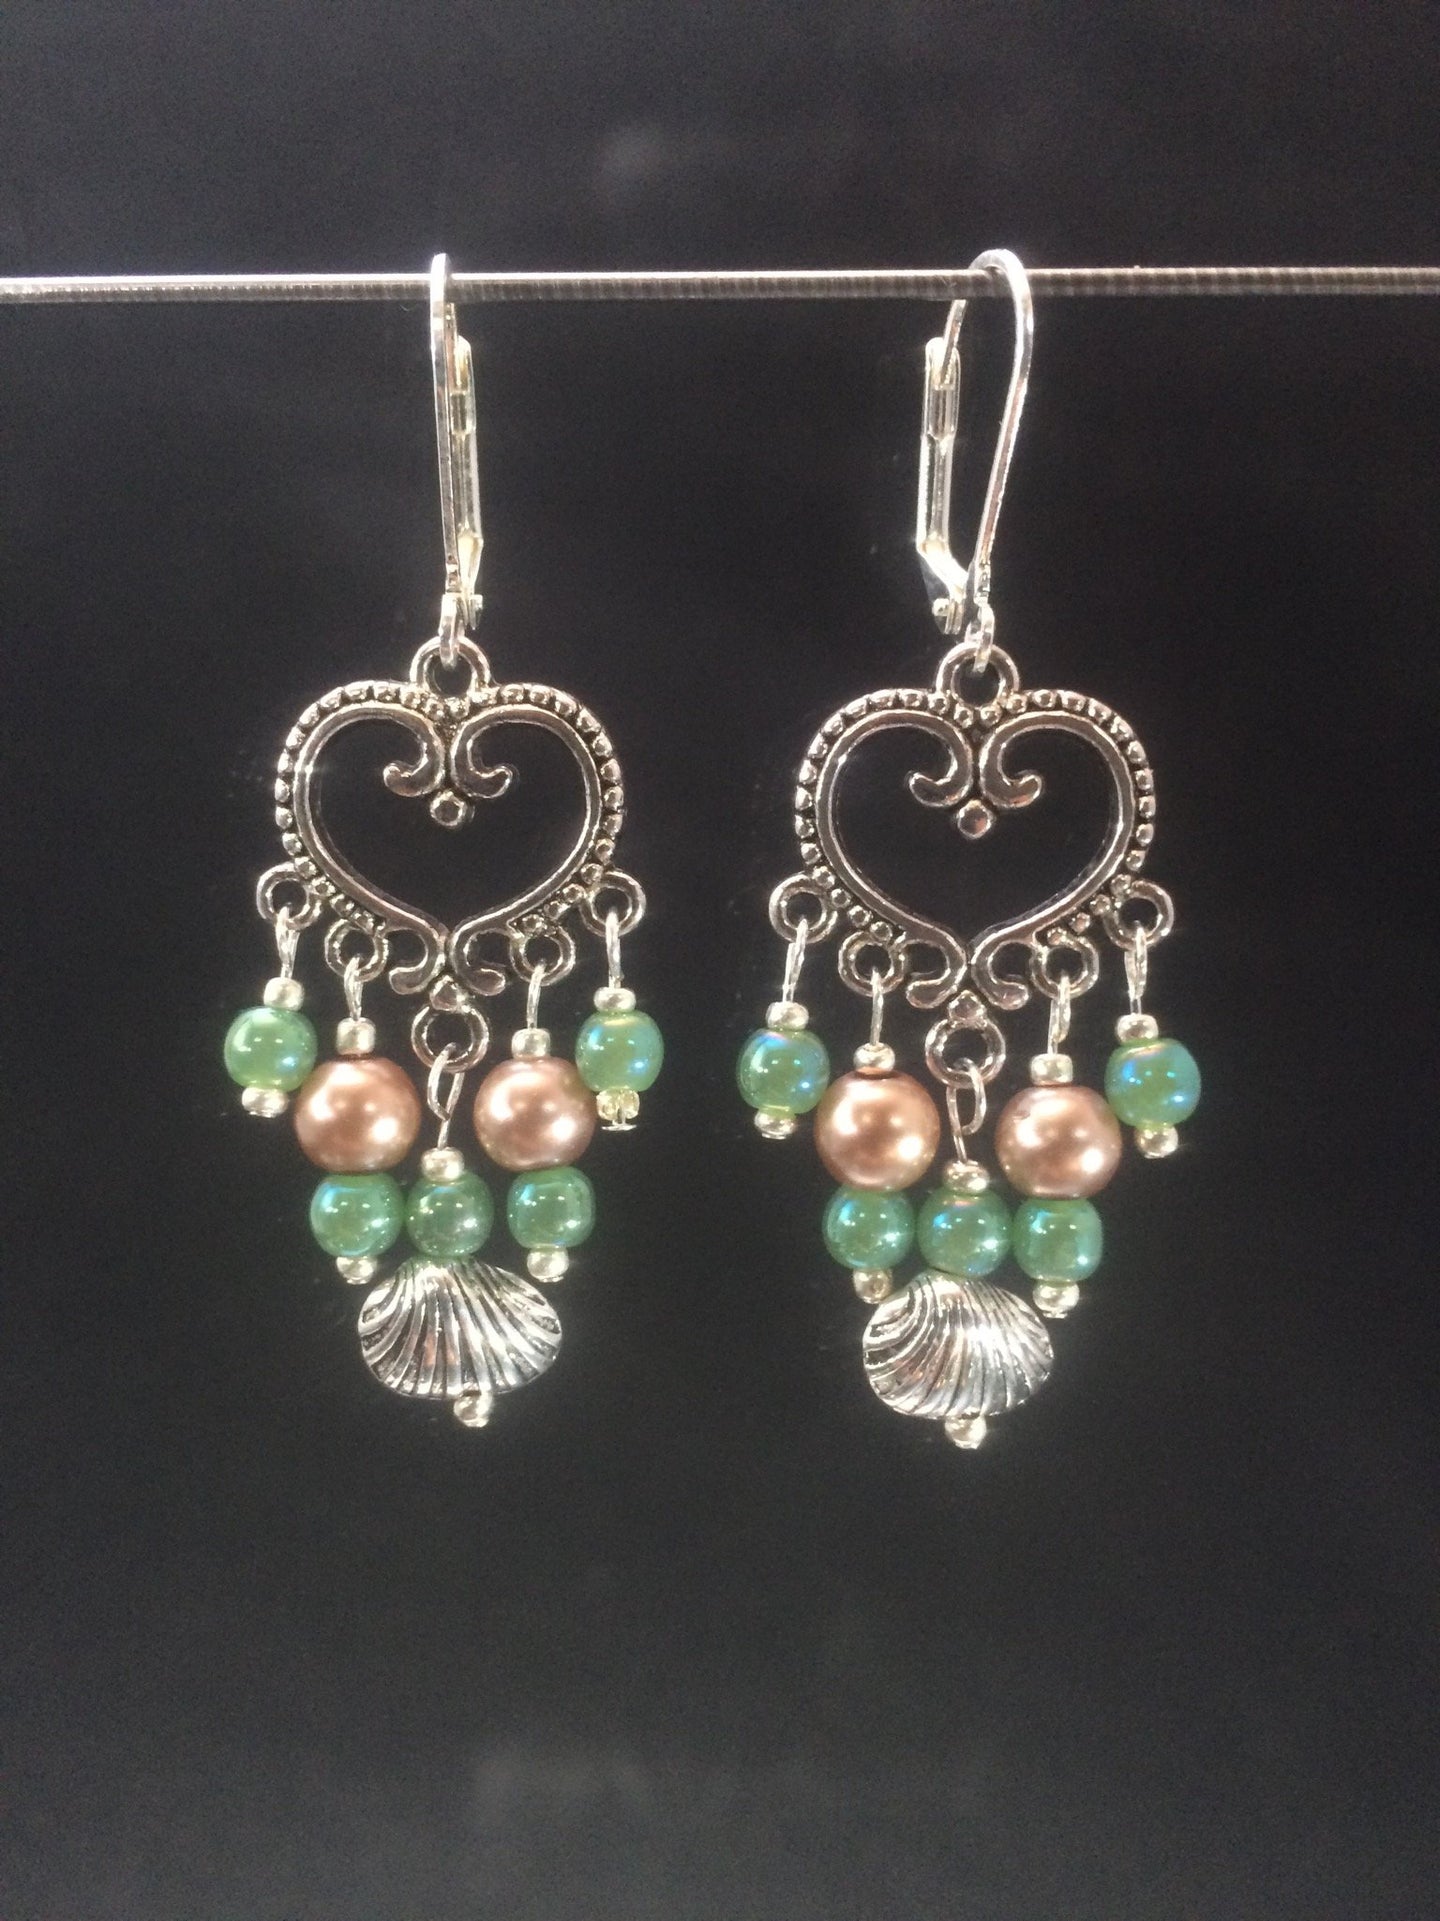 Leverback chandelier earrings made with glass pearls, metal beads, and metal shell charms.